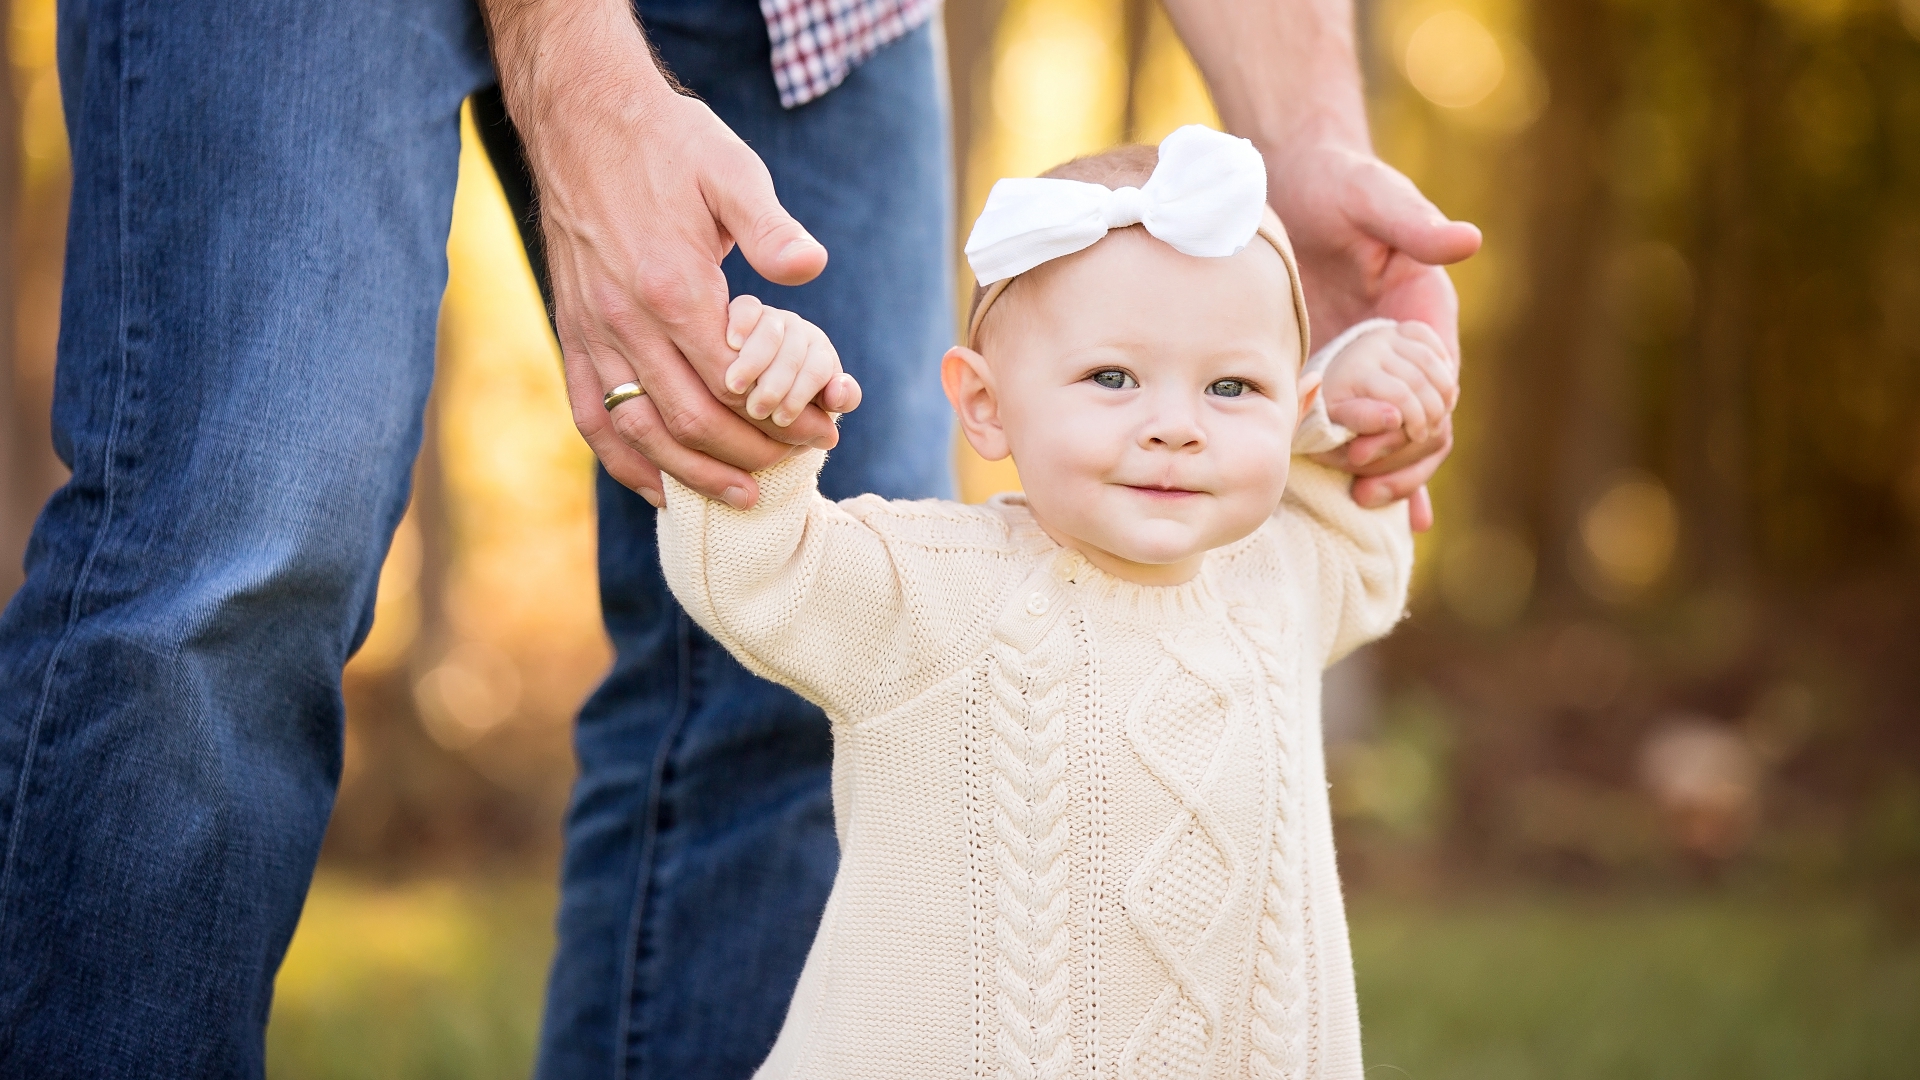 Baby Nora was born with only half a heart that worked. But that didn’t stop her from giving her all. Now she’s overcoming her rare heart condition thanks to Levine Children’s Hospital and The HEARTest Yard.